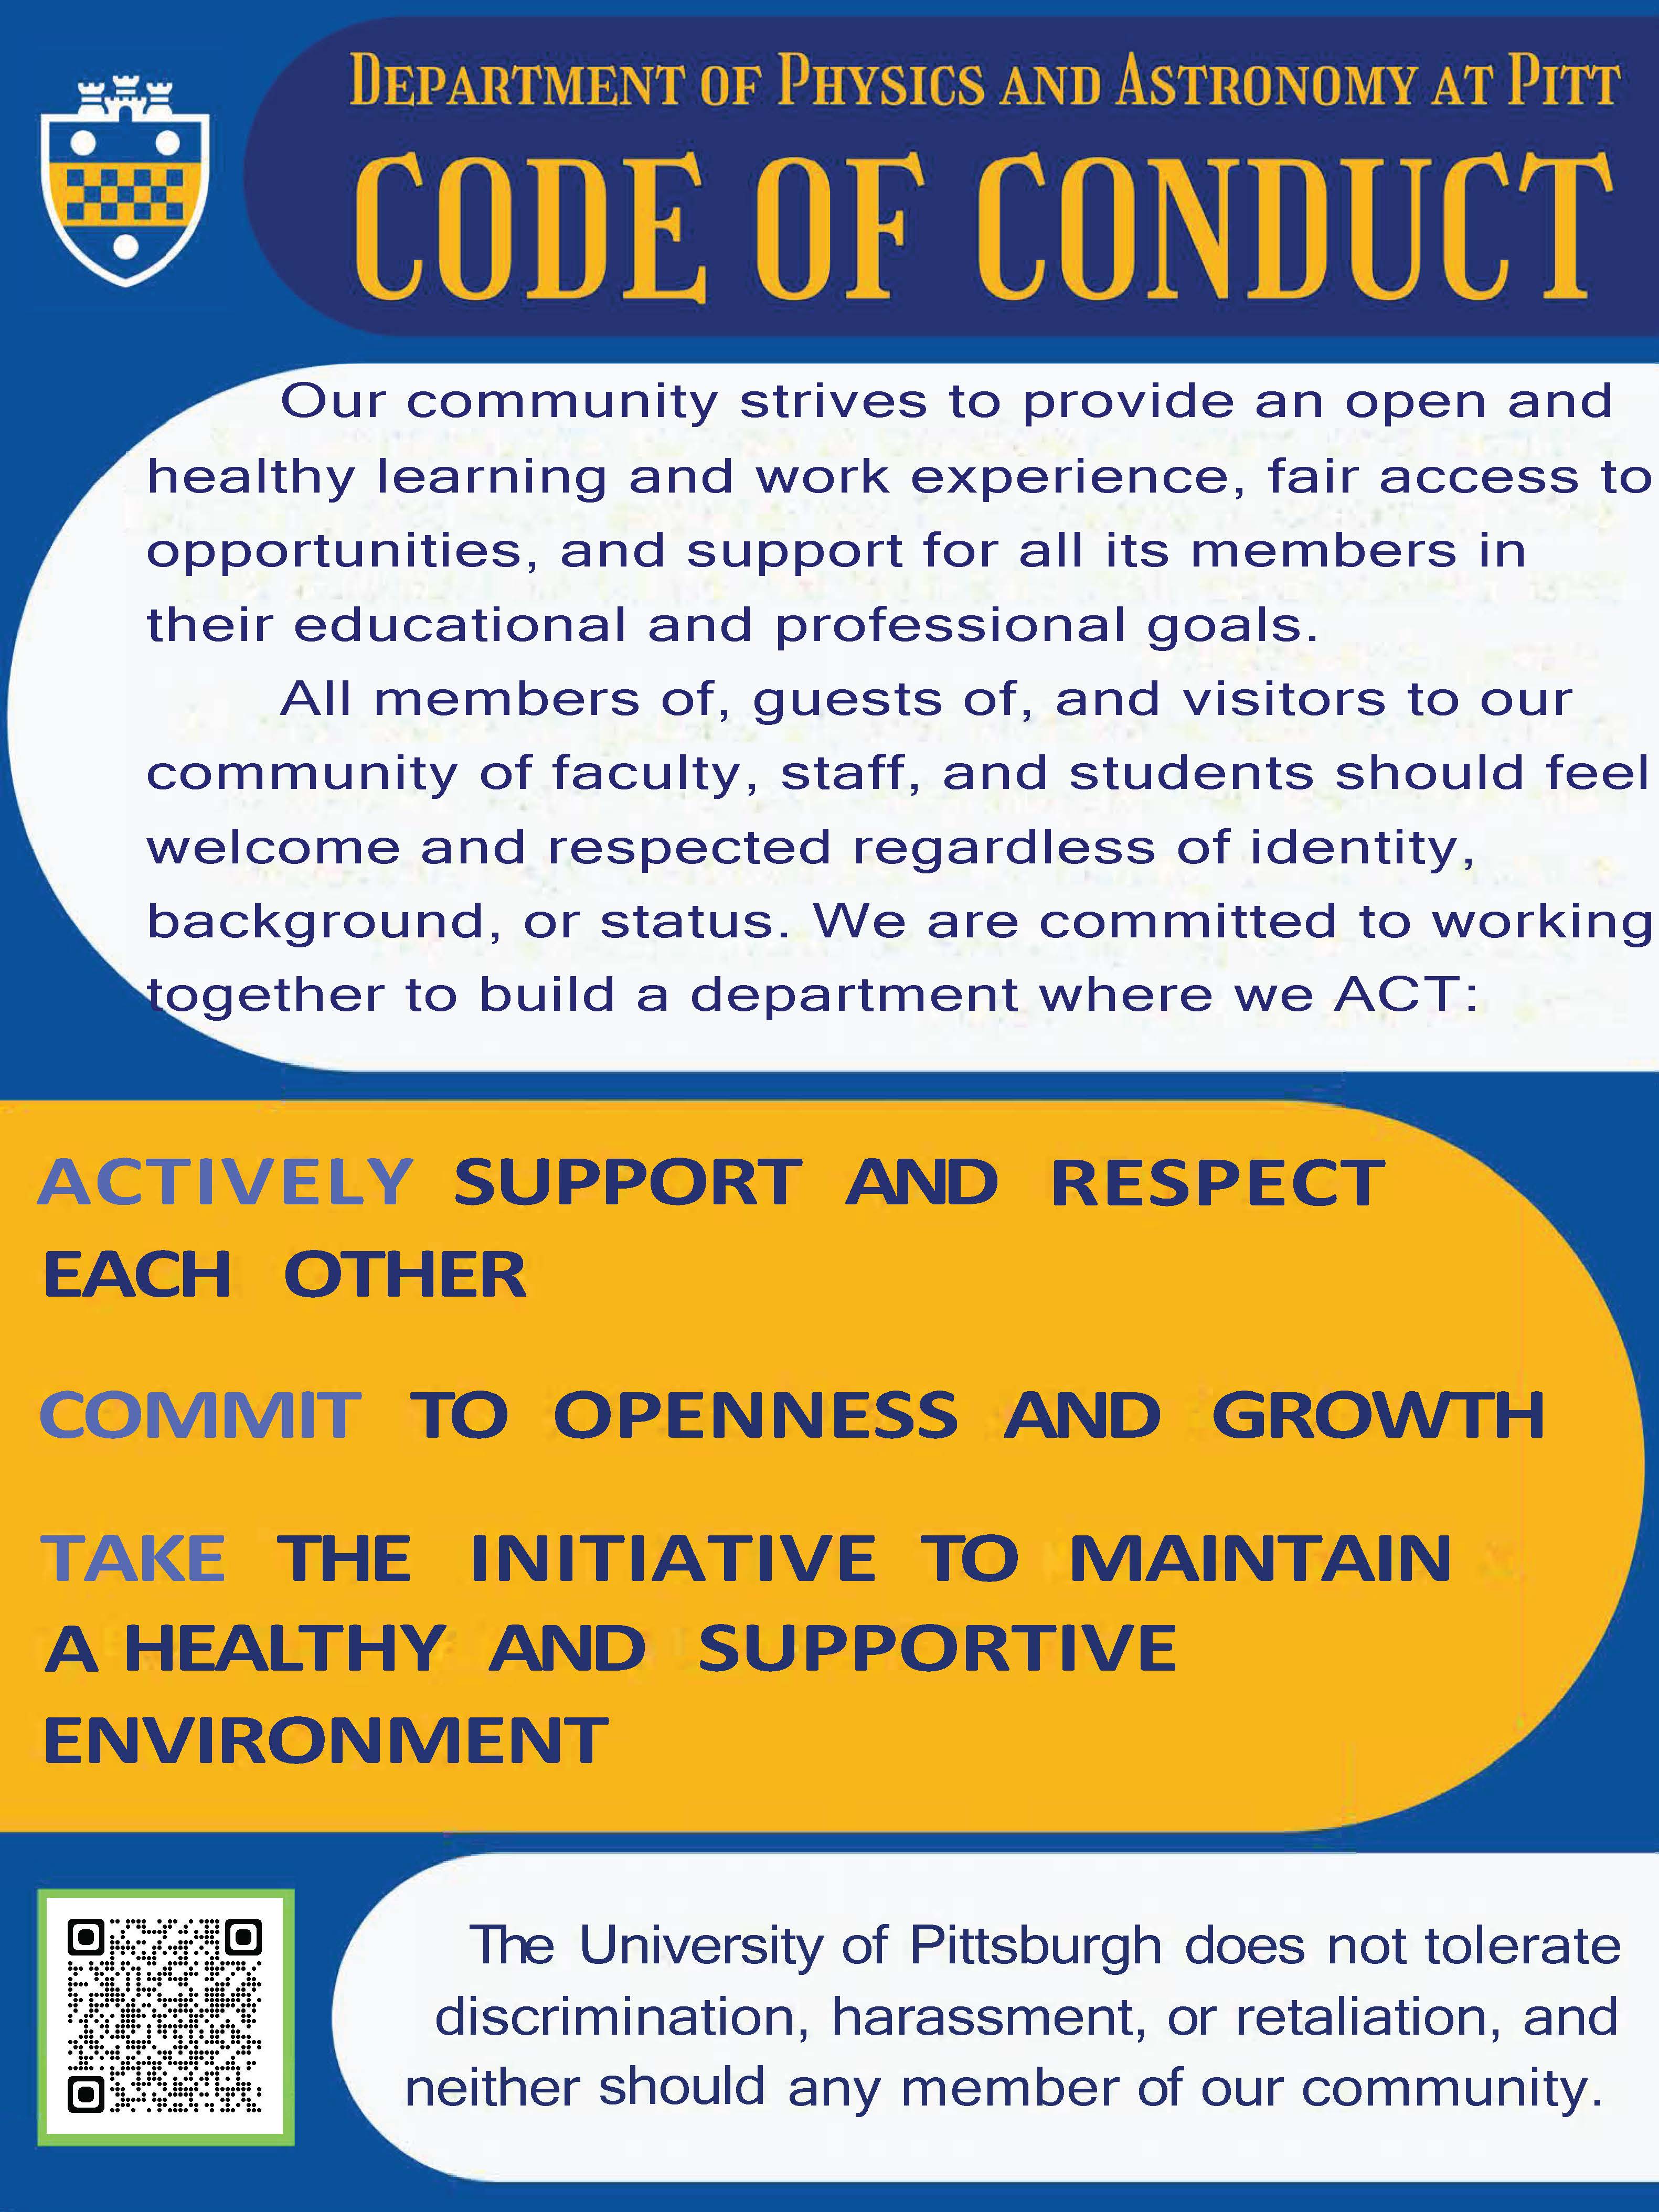 Our community strives to provide an open and healthy learning and work experience, fair access to opportunities, and support for all its members in their educational and professional goals.  All members of, guests of, and visitors to our community of faculty, staff, and students should feel welcome and respected regardless of identity, background, or status. We are committed to working together to build a department where we ACT: QR code on flyer